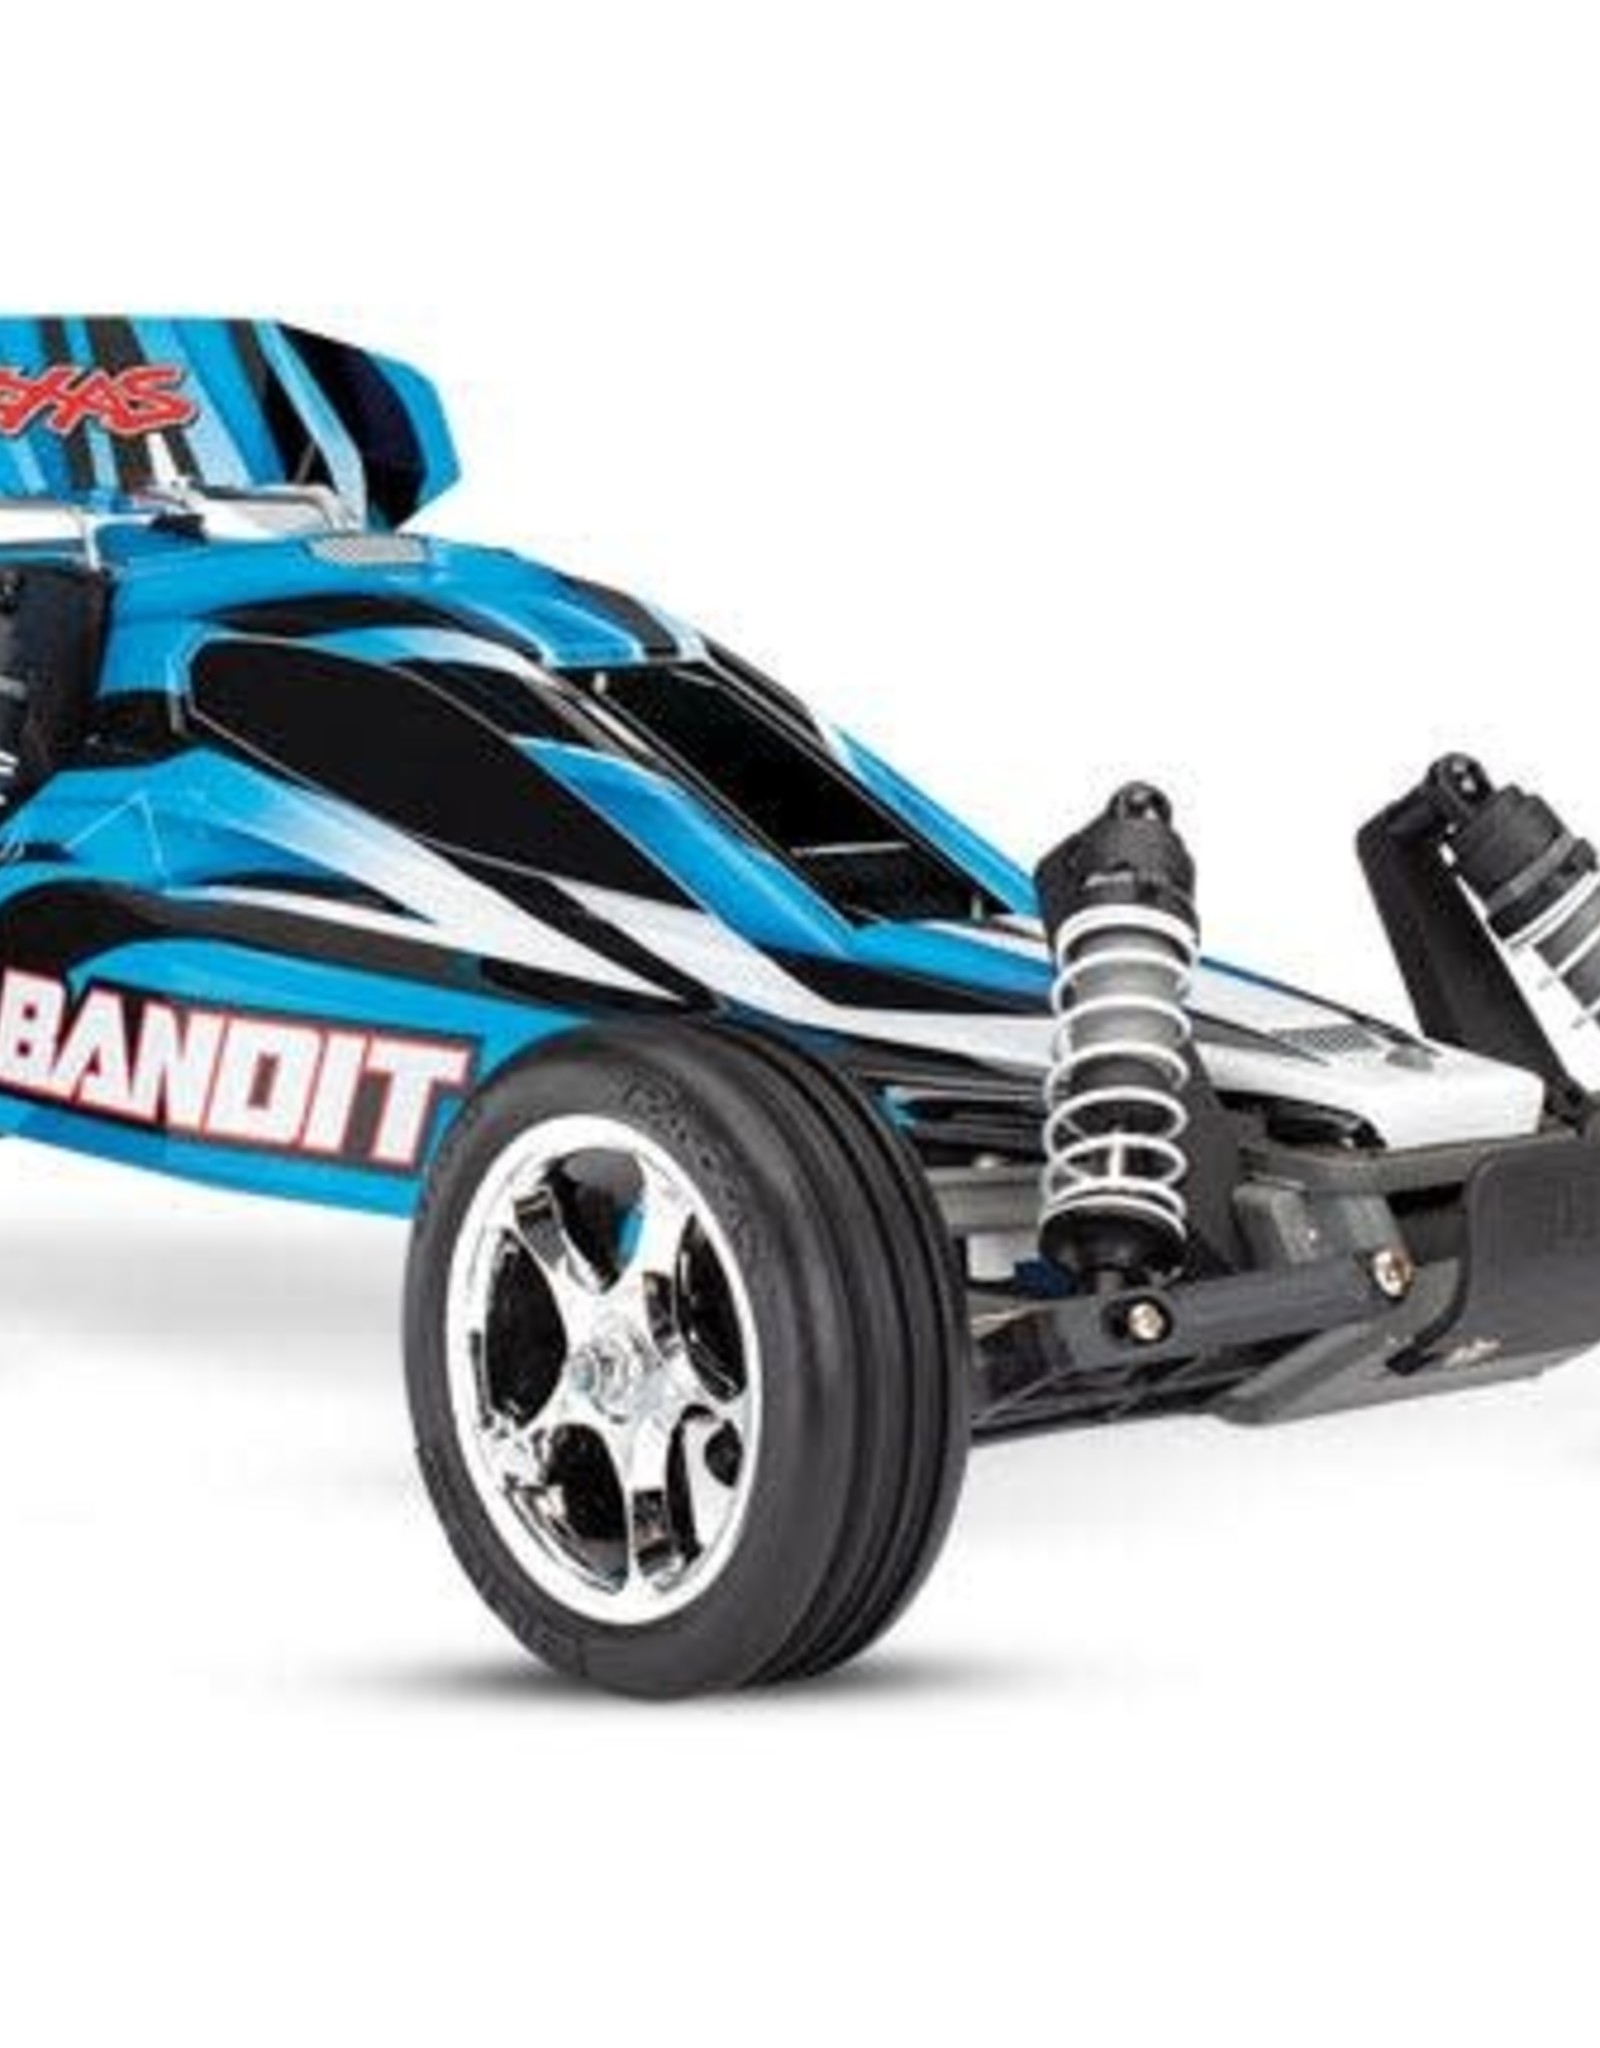 TRAXXAS BANDIT: 1/10 EXTREME SPORTS BUGGY no battery or charger